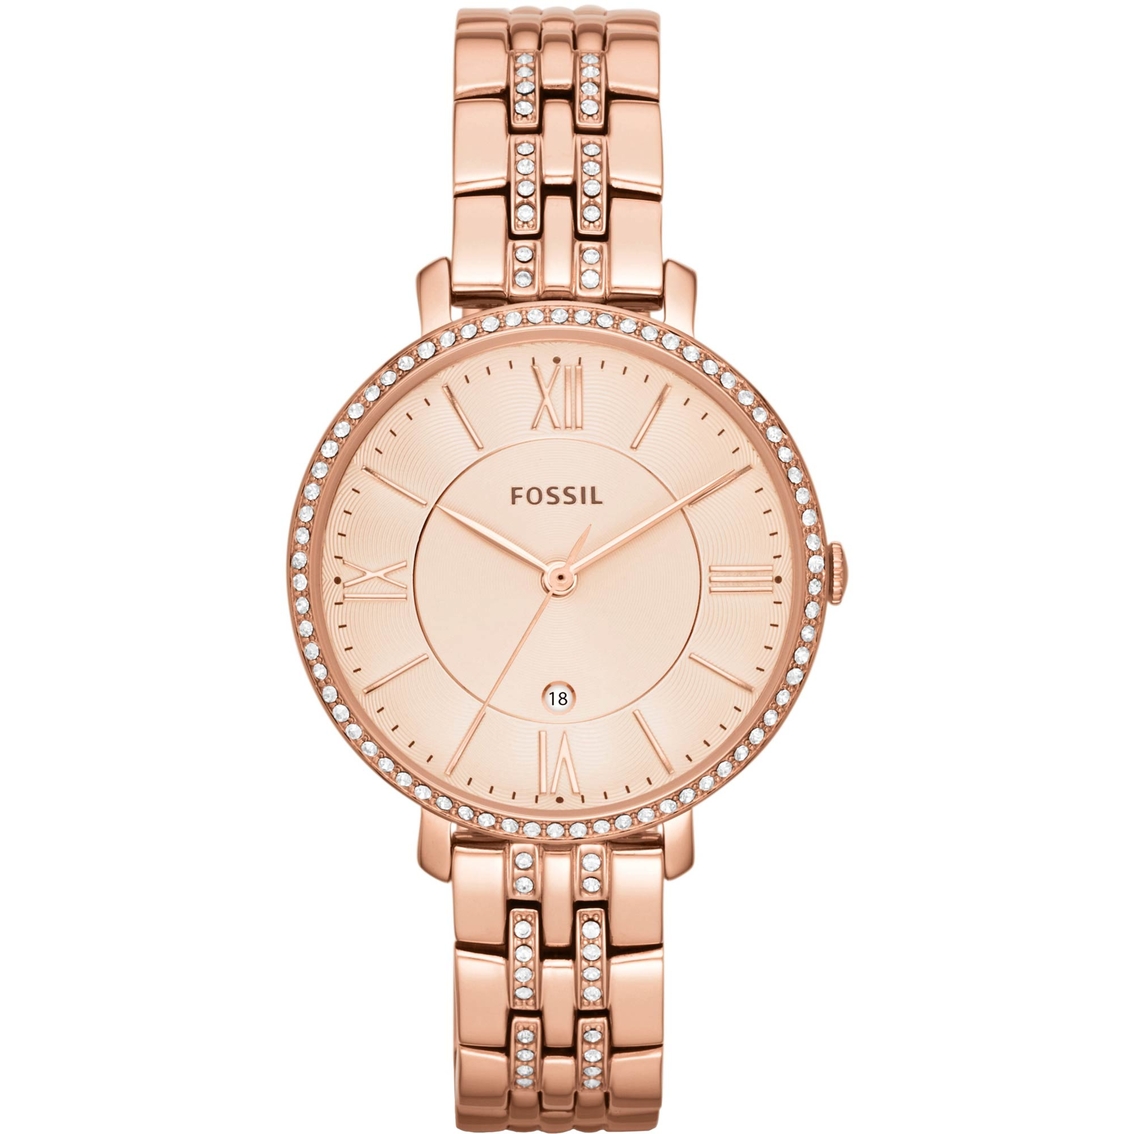 Fossil Women's Jacqueline 3 Hand Date Rose Goldtone Watch 36mm Es3546 ...